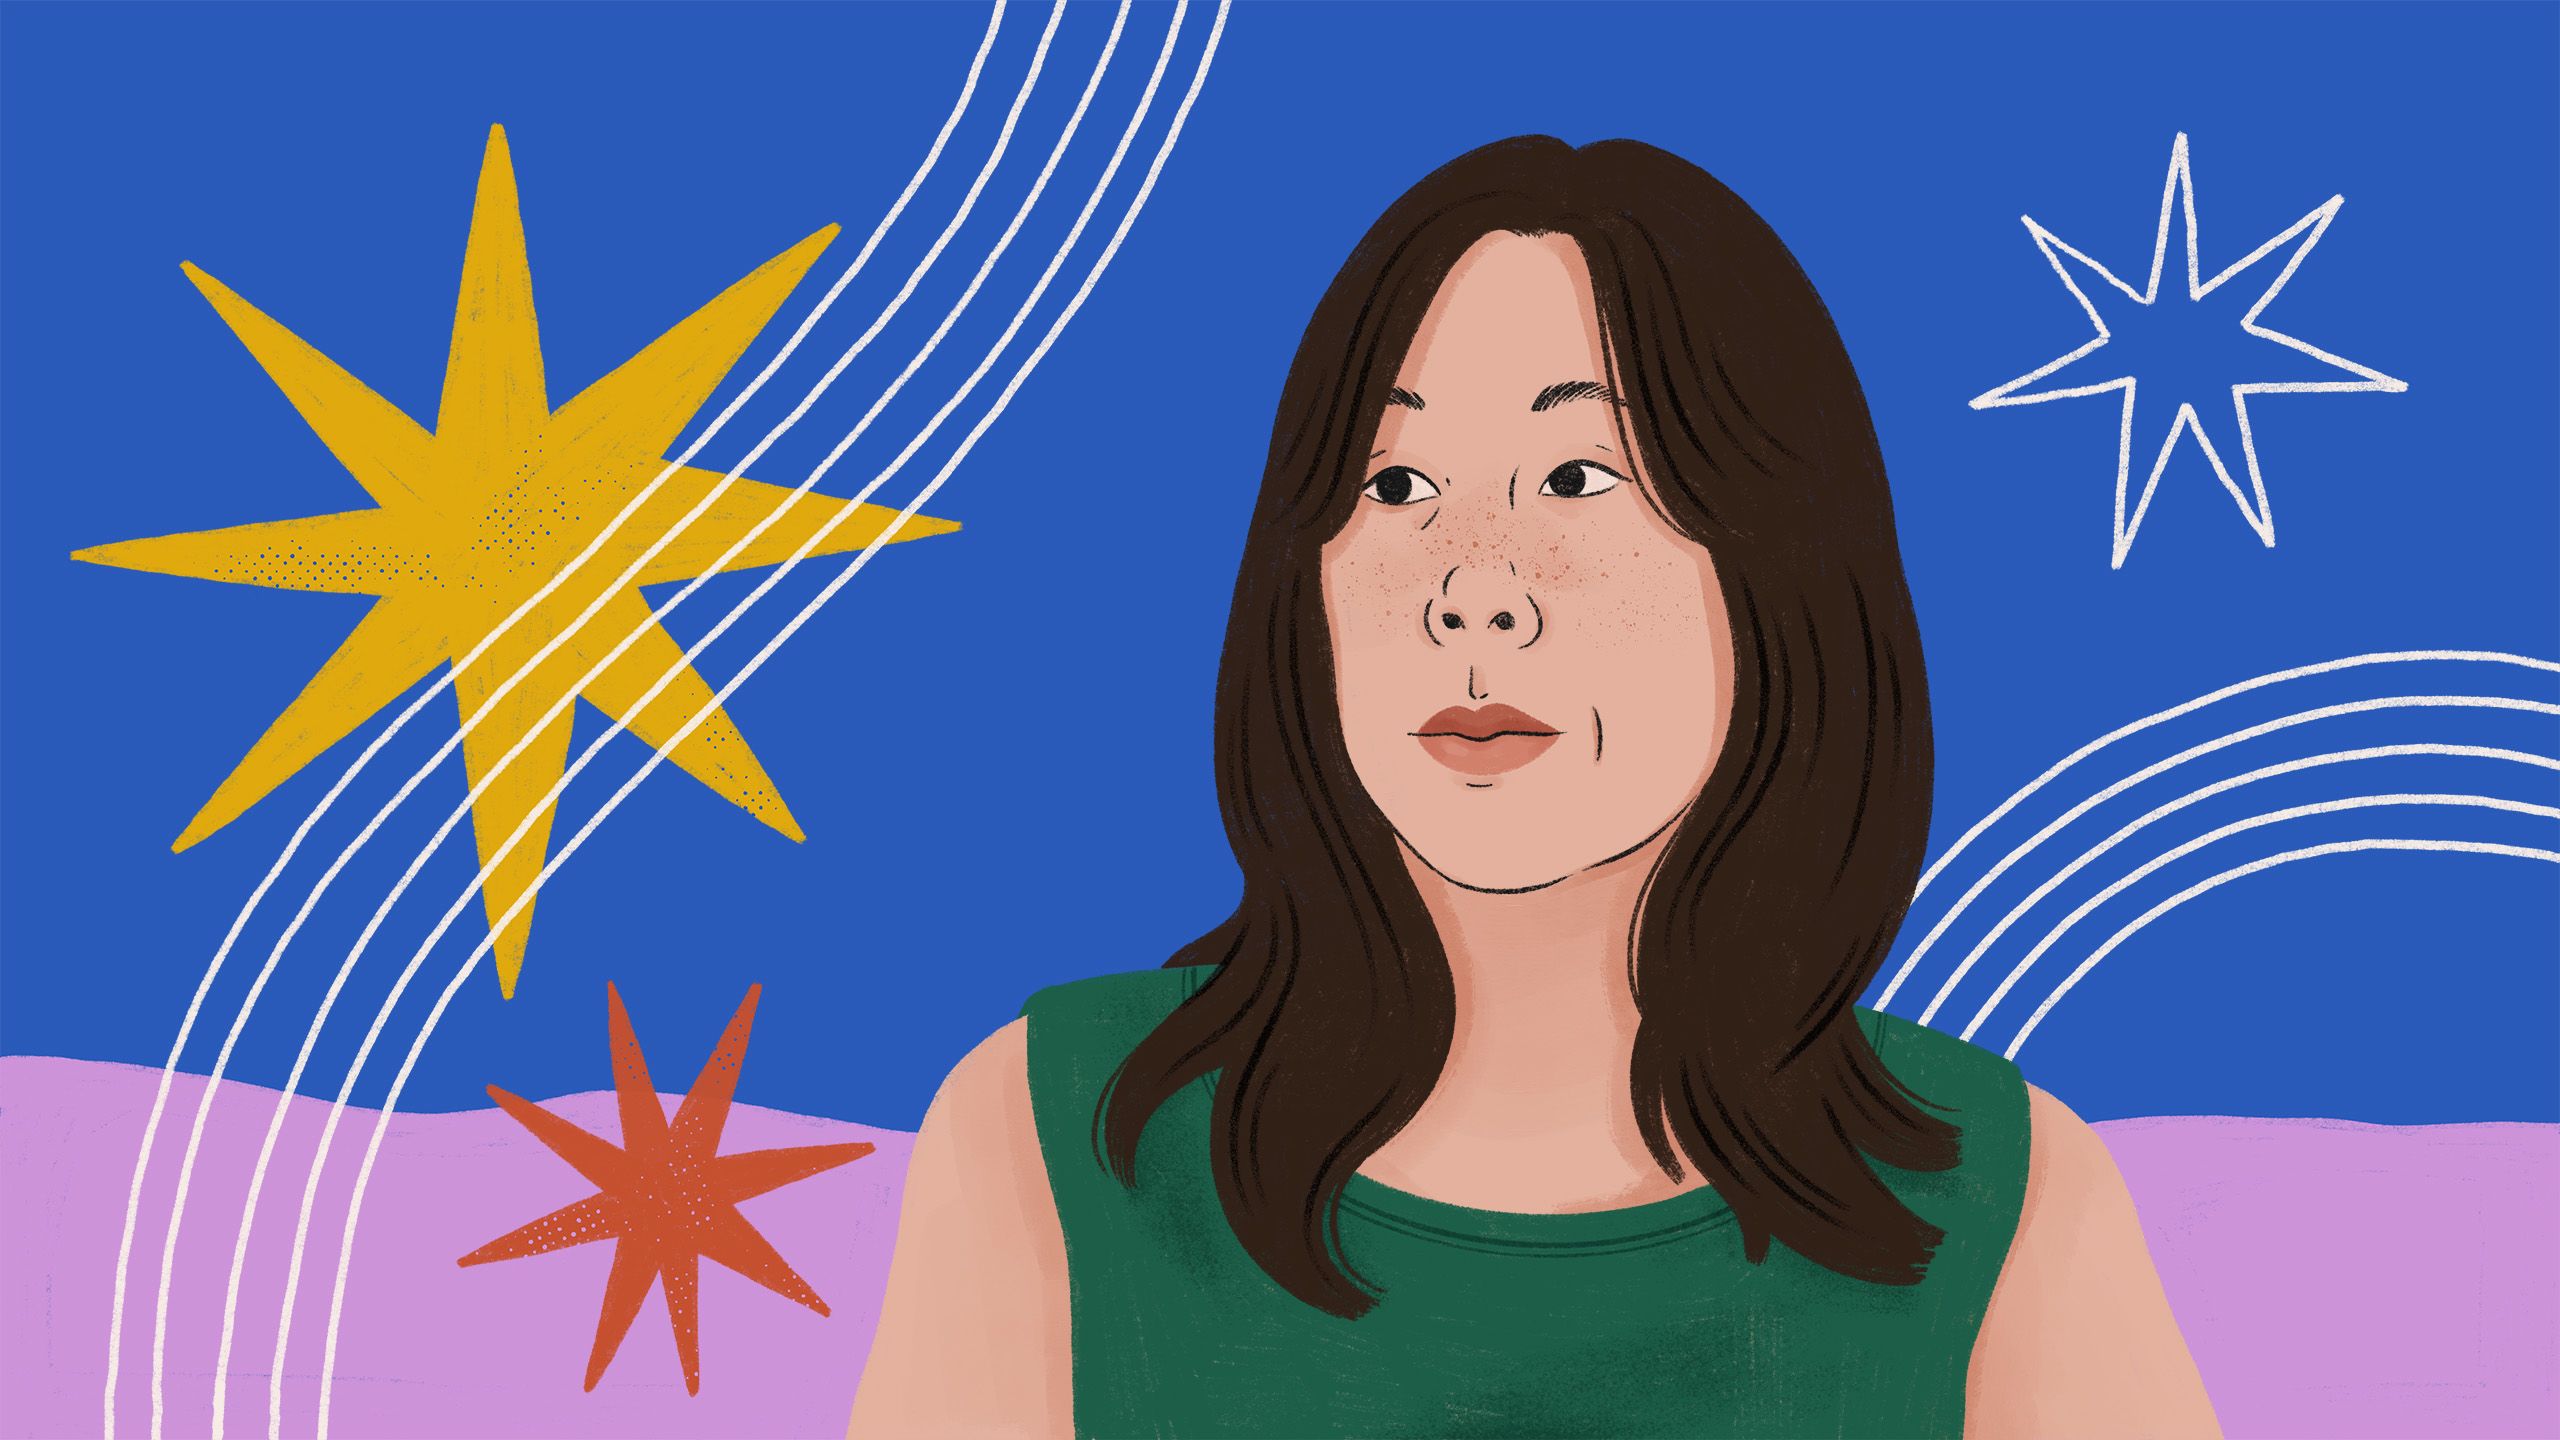 An illustration of a person on a blue and purple backdrop with star and wave shapes